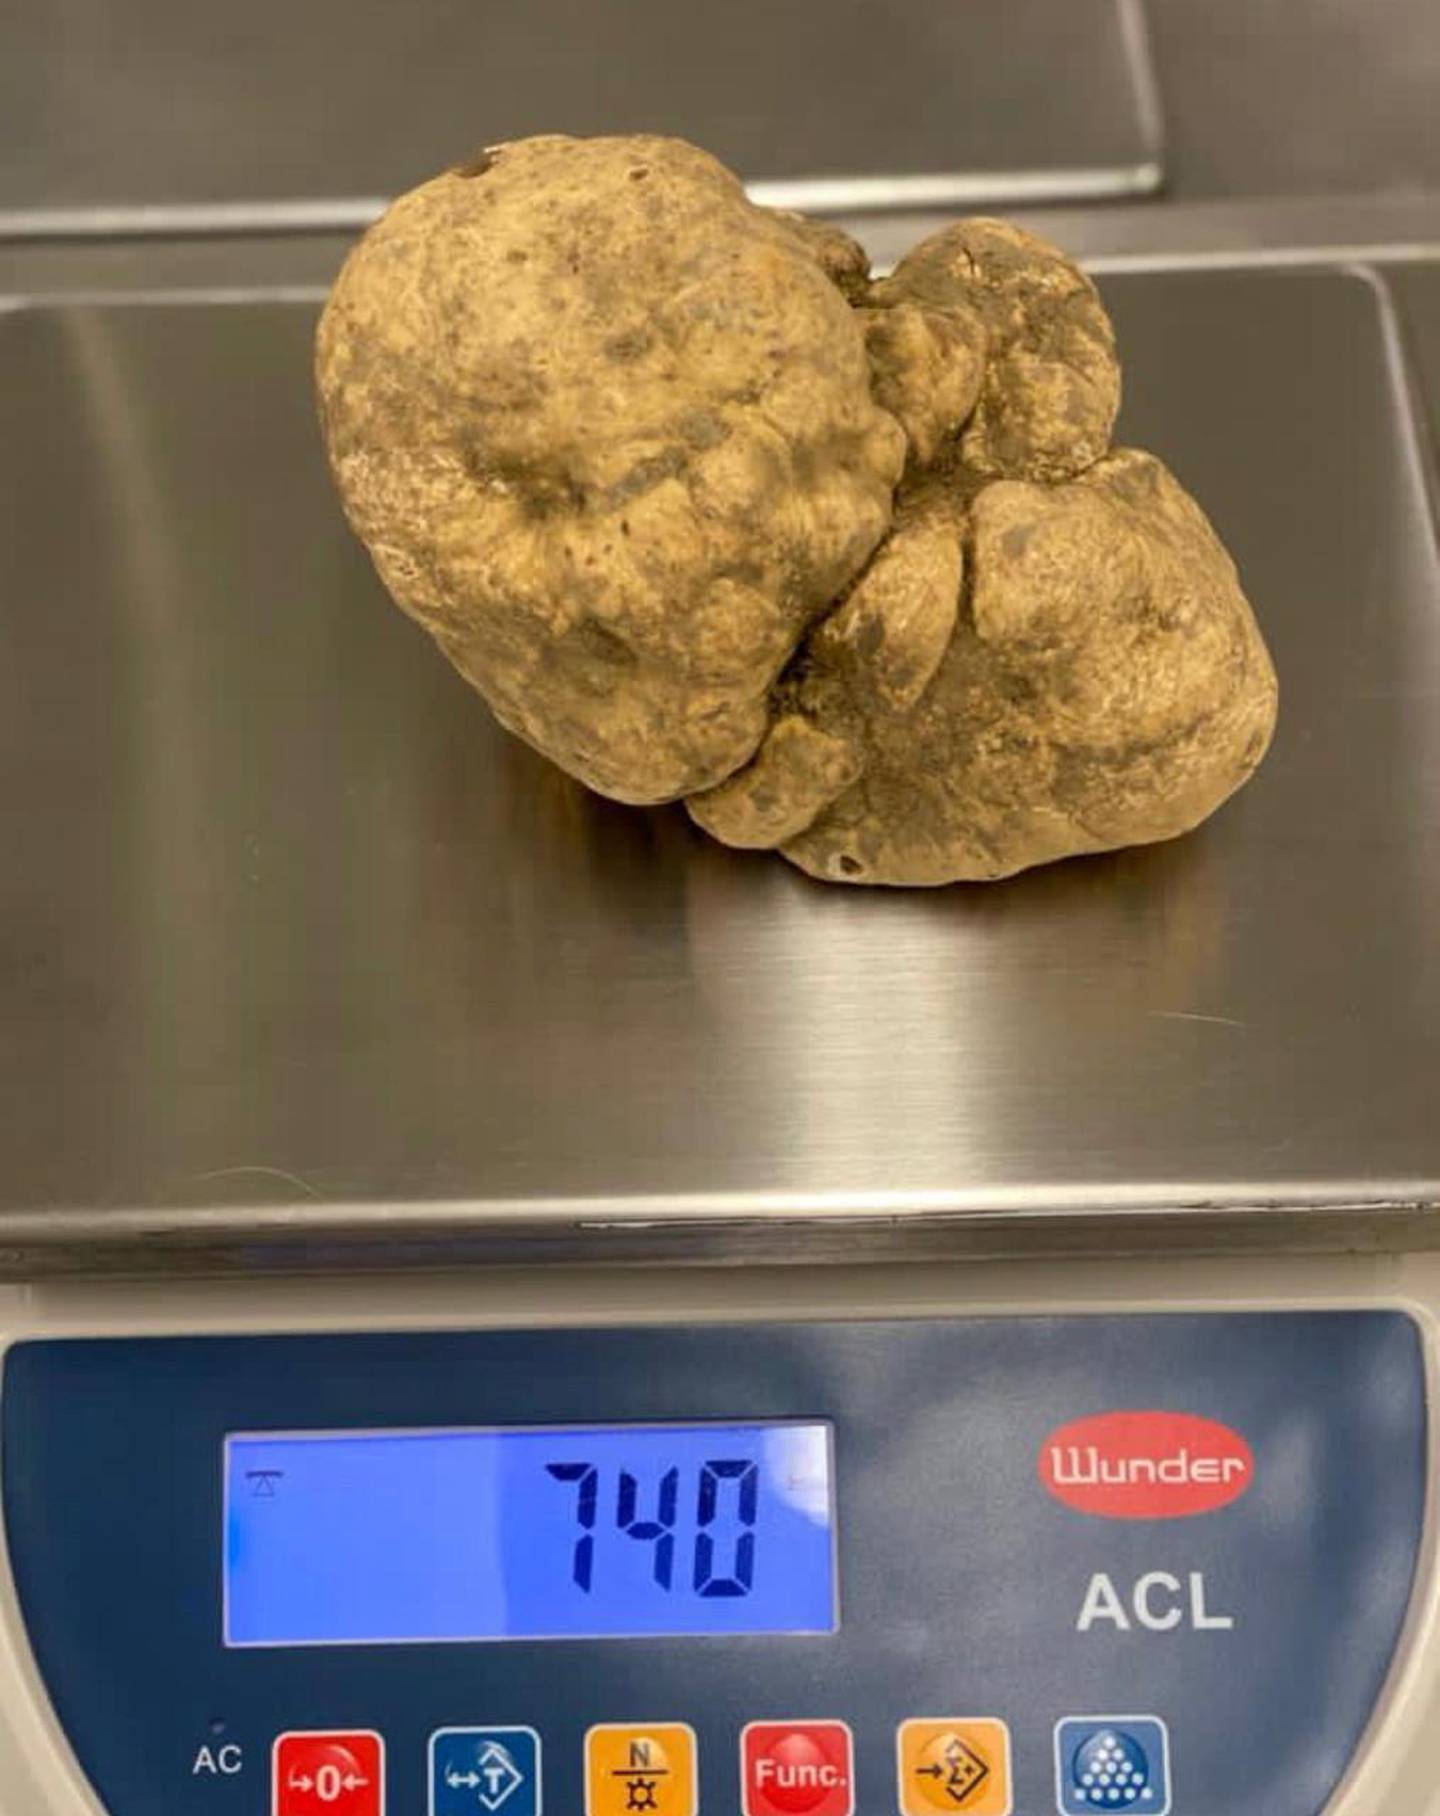 The value of a white truffle increases according to weight. Courtesy of Massimo Vidoni